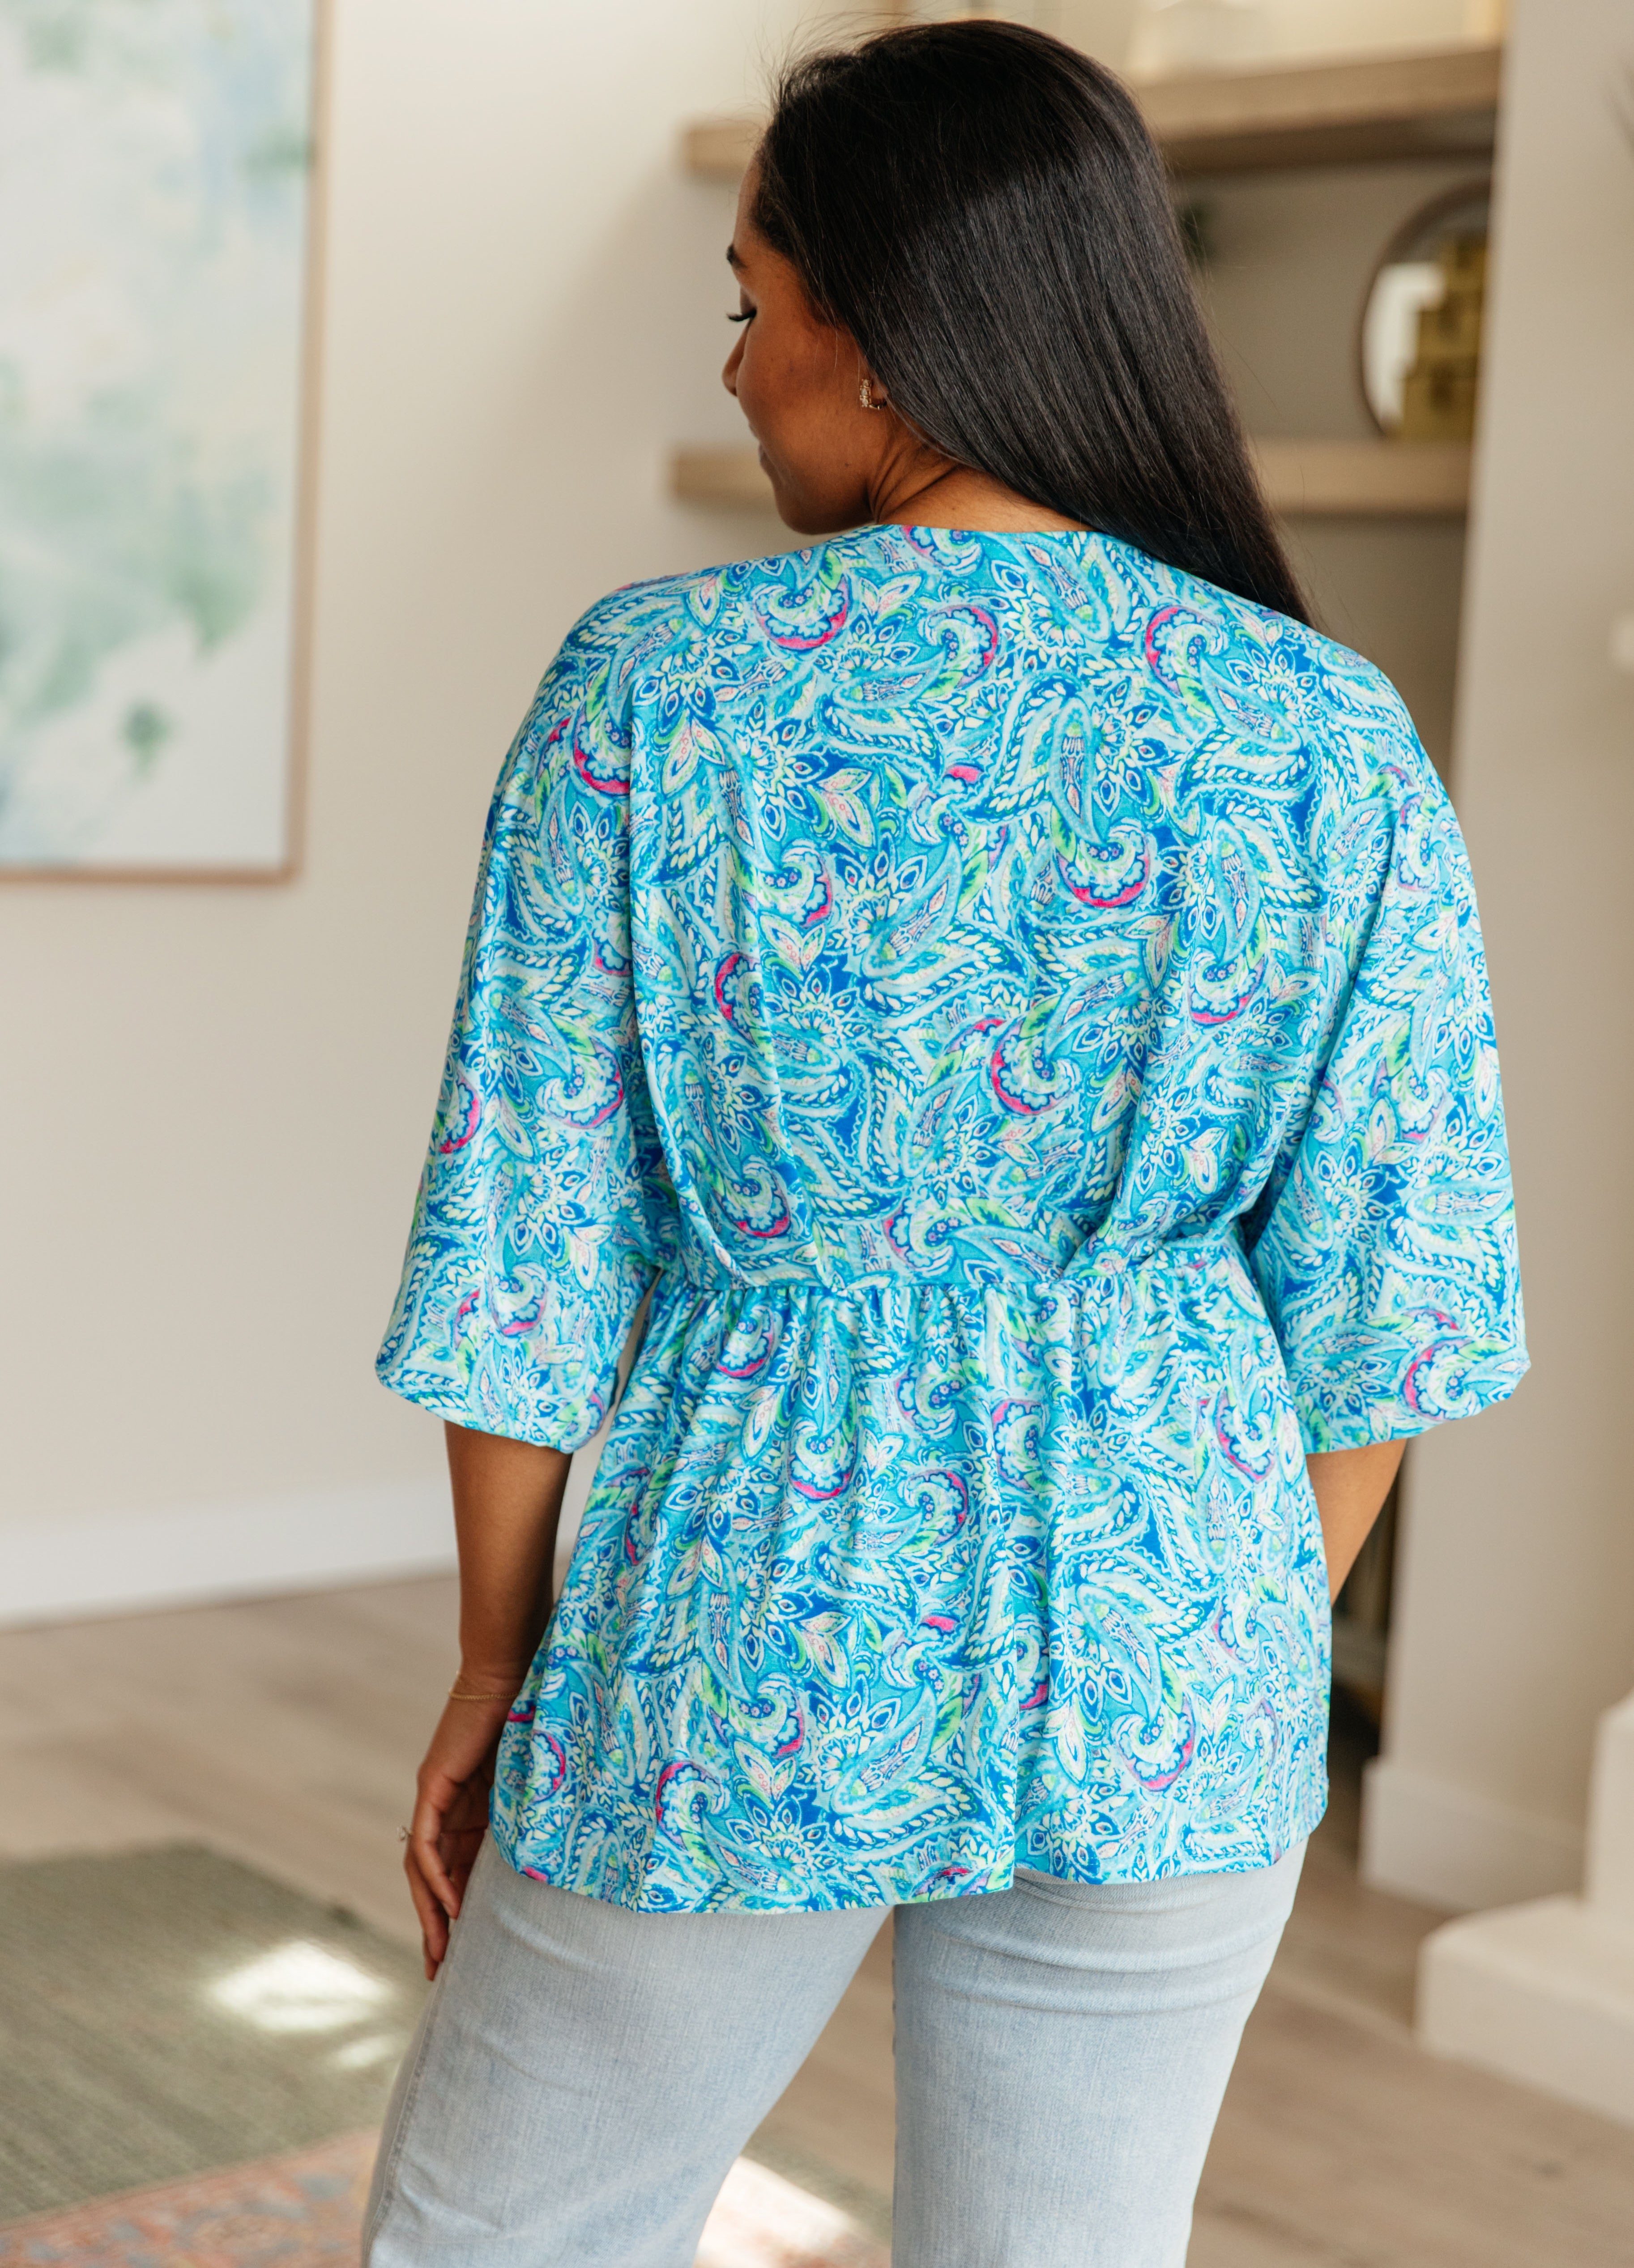 Dreamer Peplum Top in Blue and Teal Paisley Tops Ave Shops   